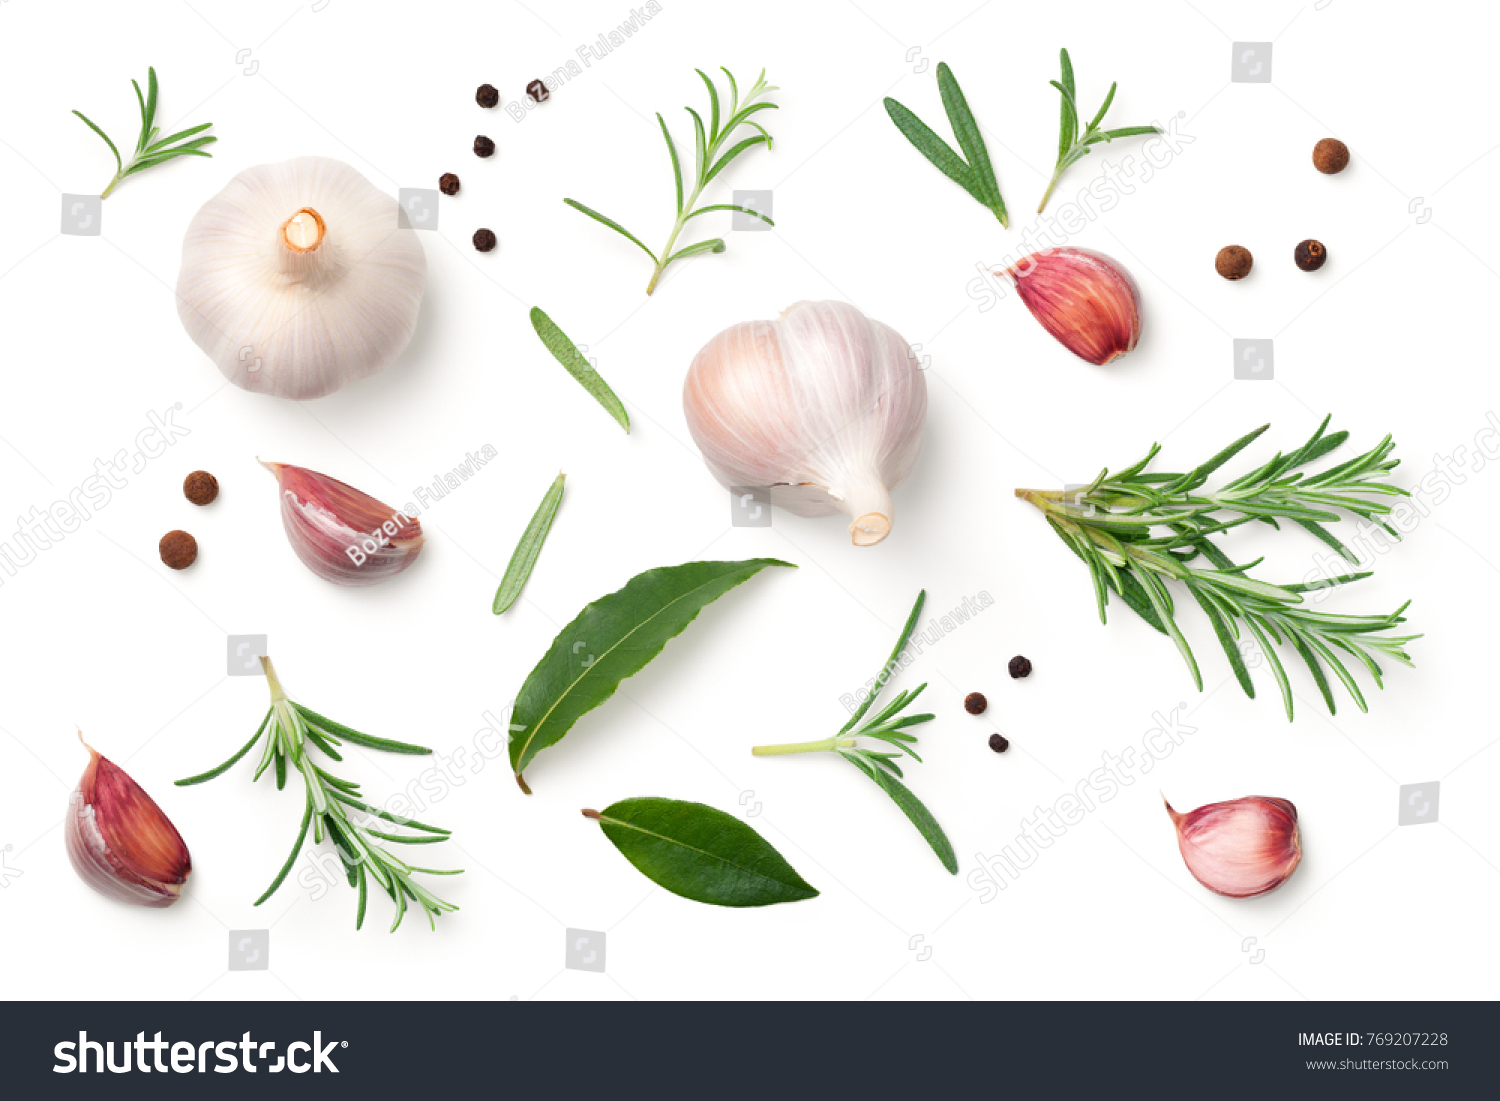 Garlic, rosemary, bay leaves, allspice and pepper isolated on white background. Flat lay. Top view  #769207228